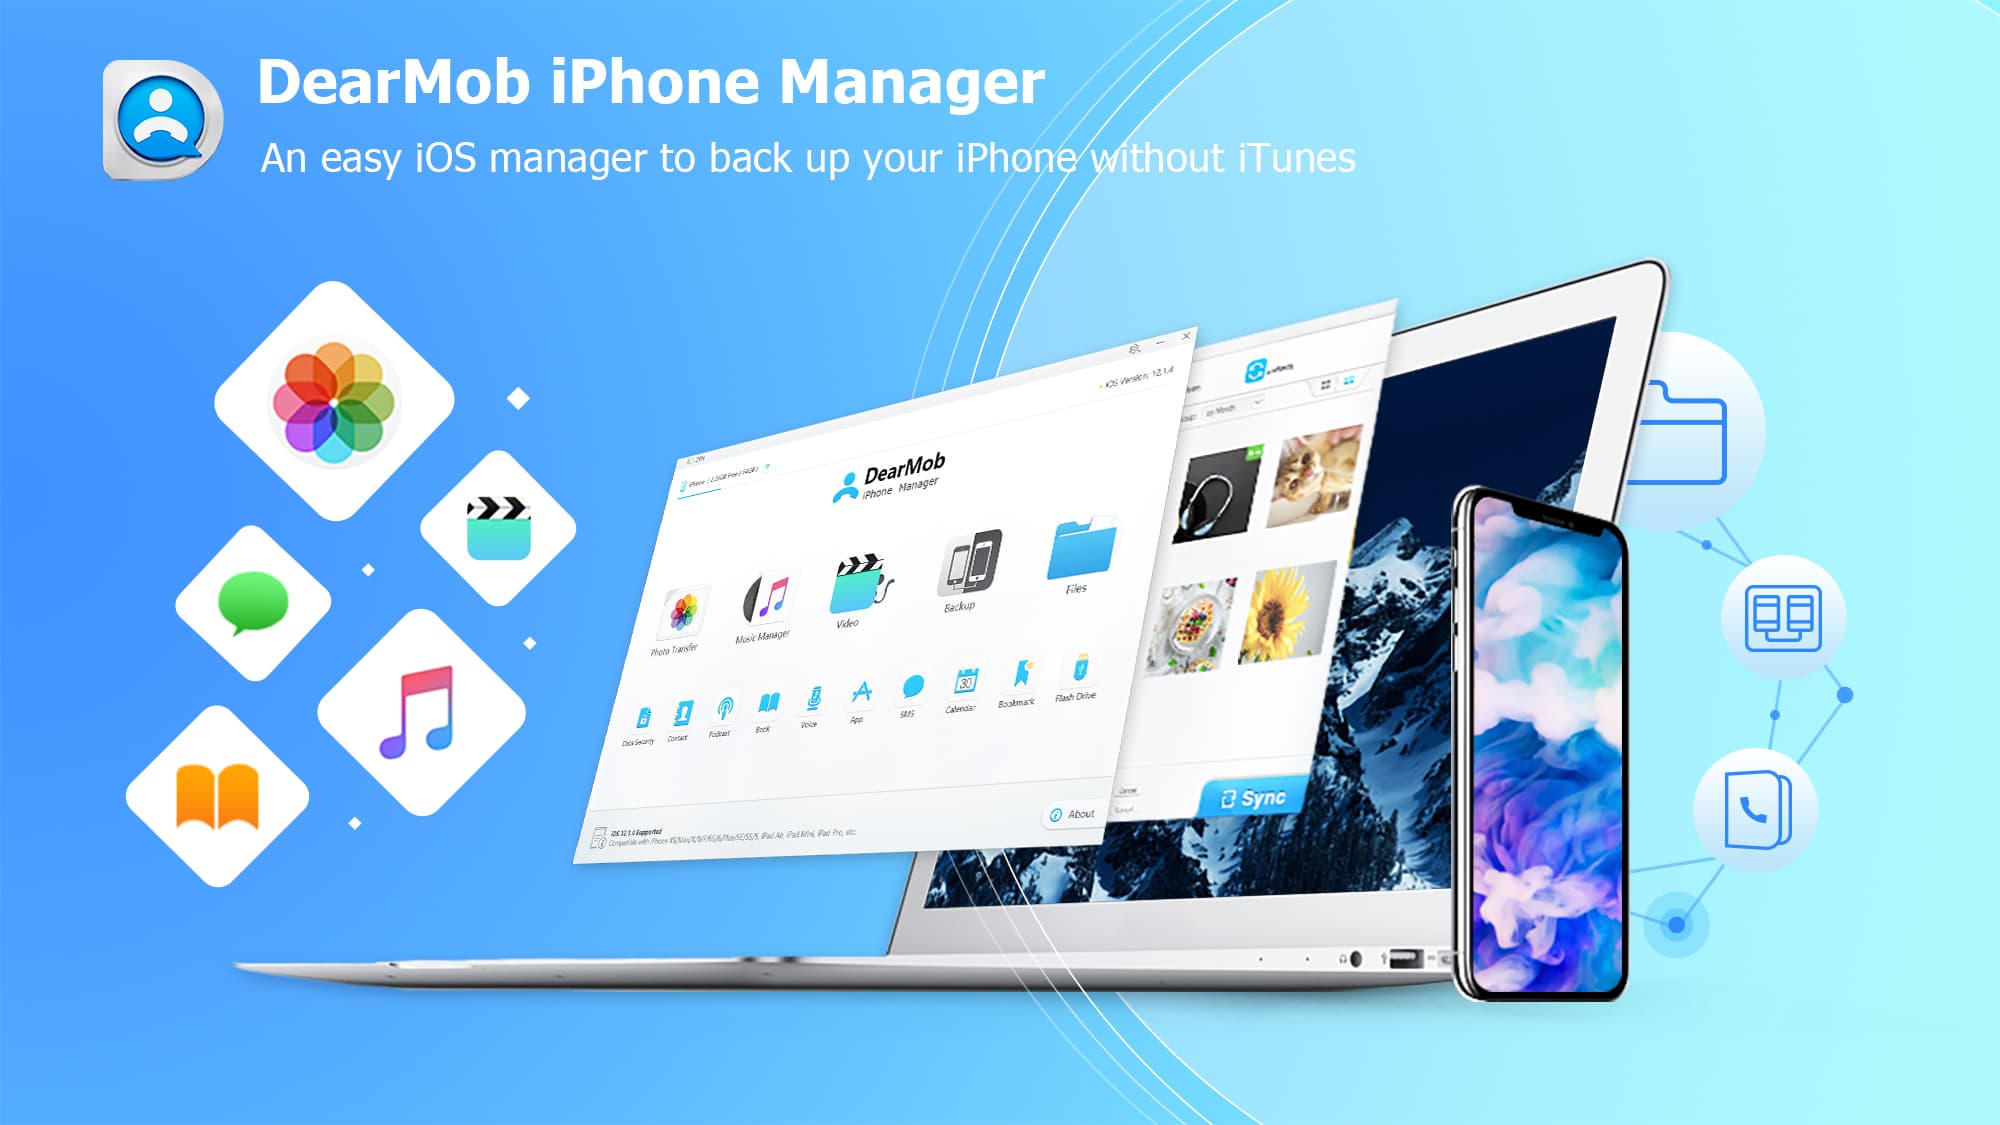 When it comes to iPhone backup, there's a better path than iTunes: DearMob iPhone Manager.